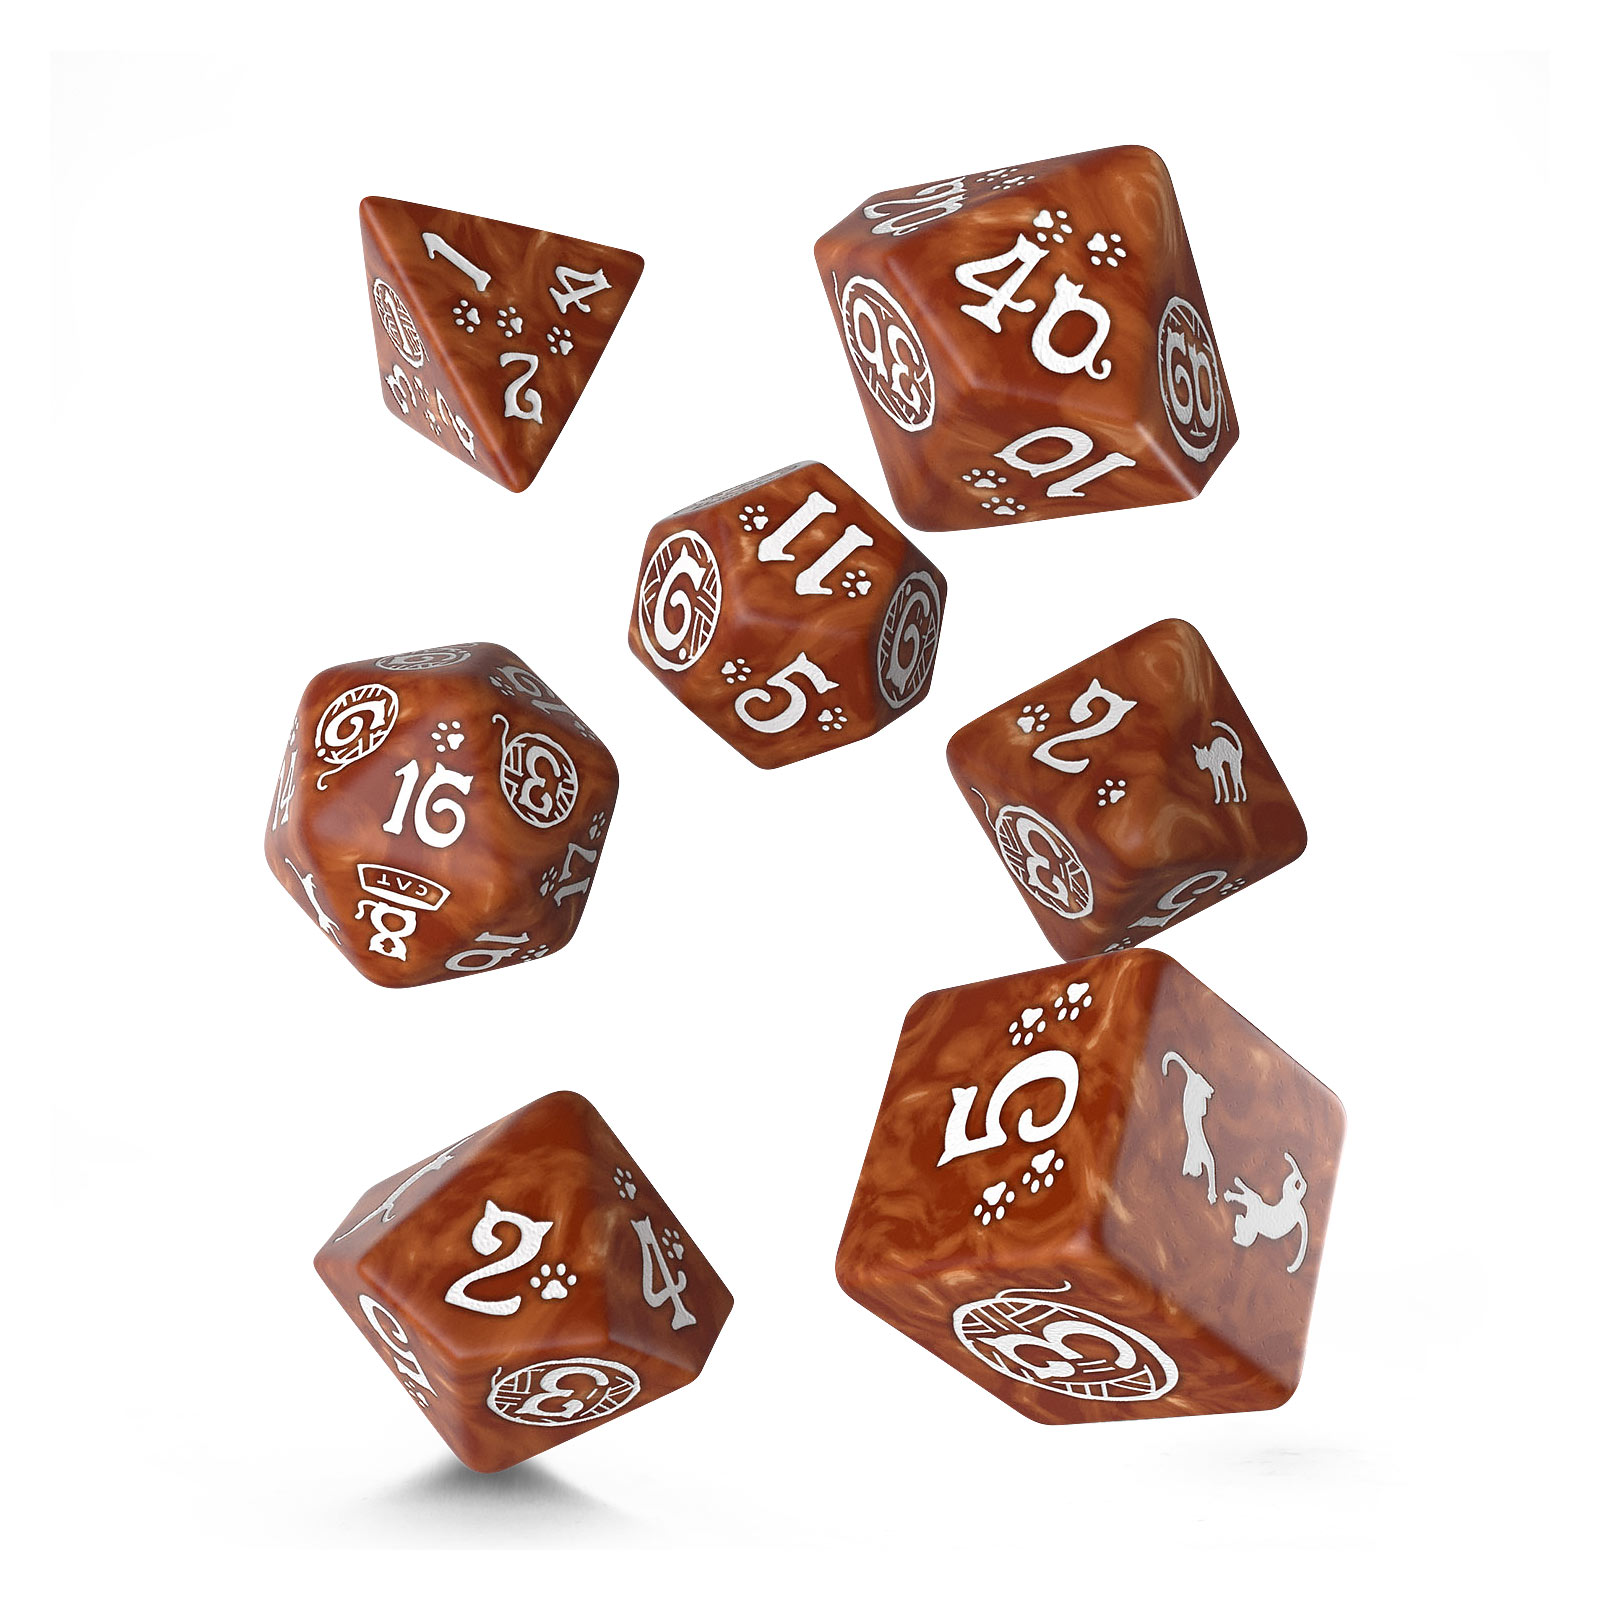 Cats - Muffin RPG Dice Set 7pcs